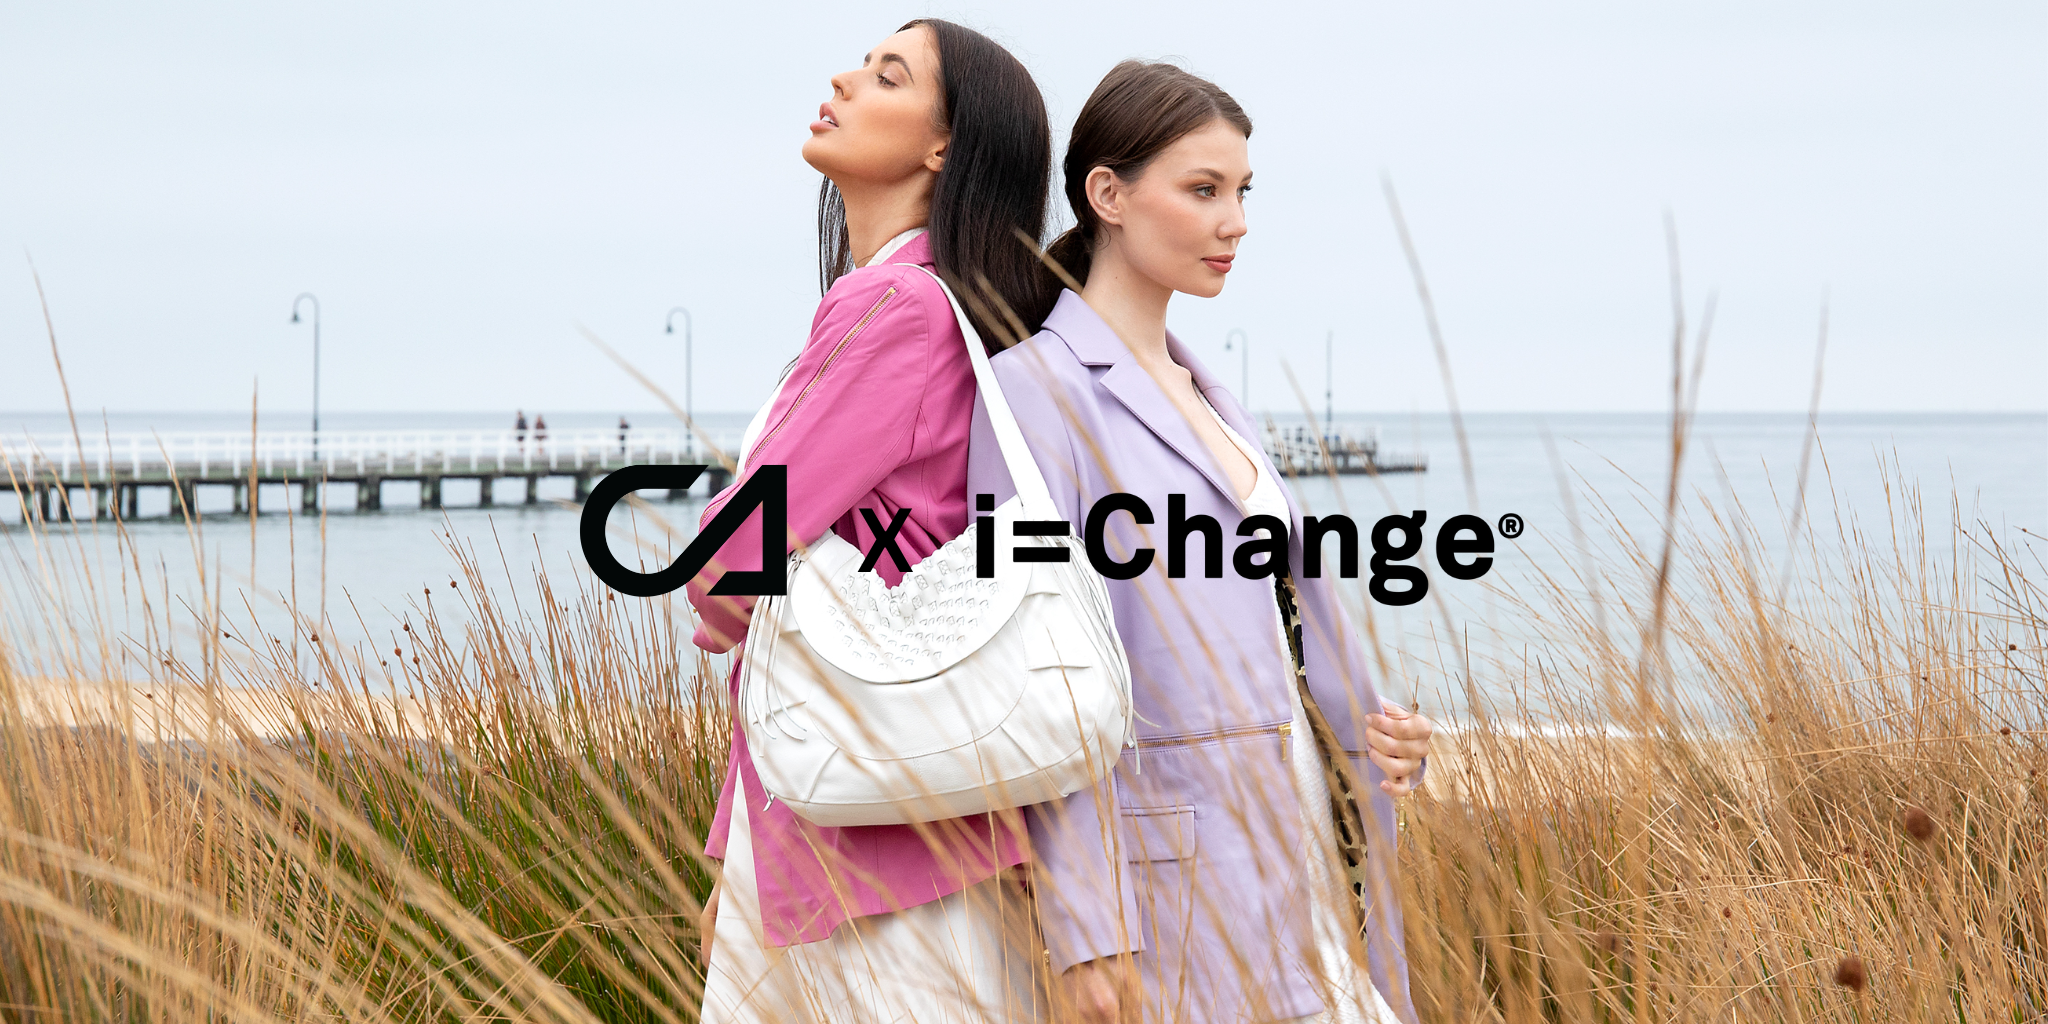 Cadelle Partnerships: Making a difference with i=Change